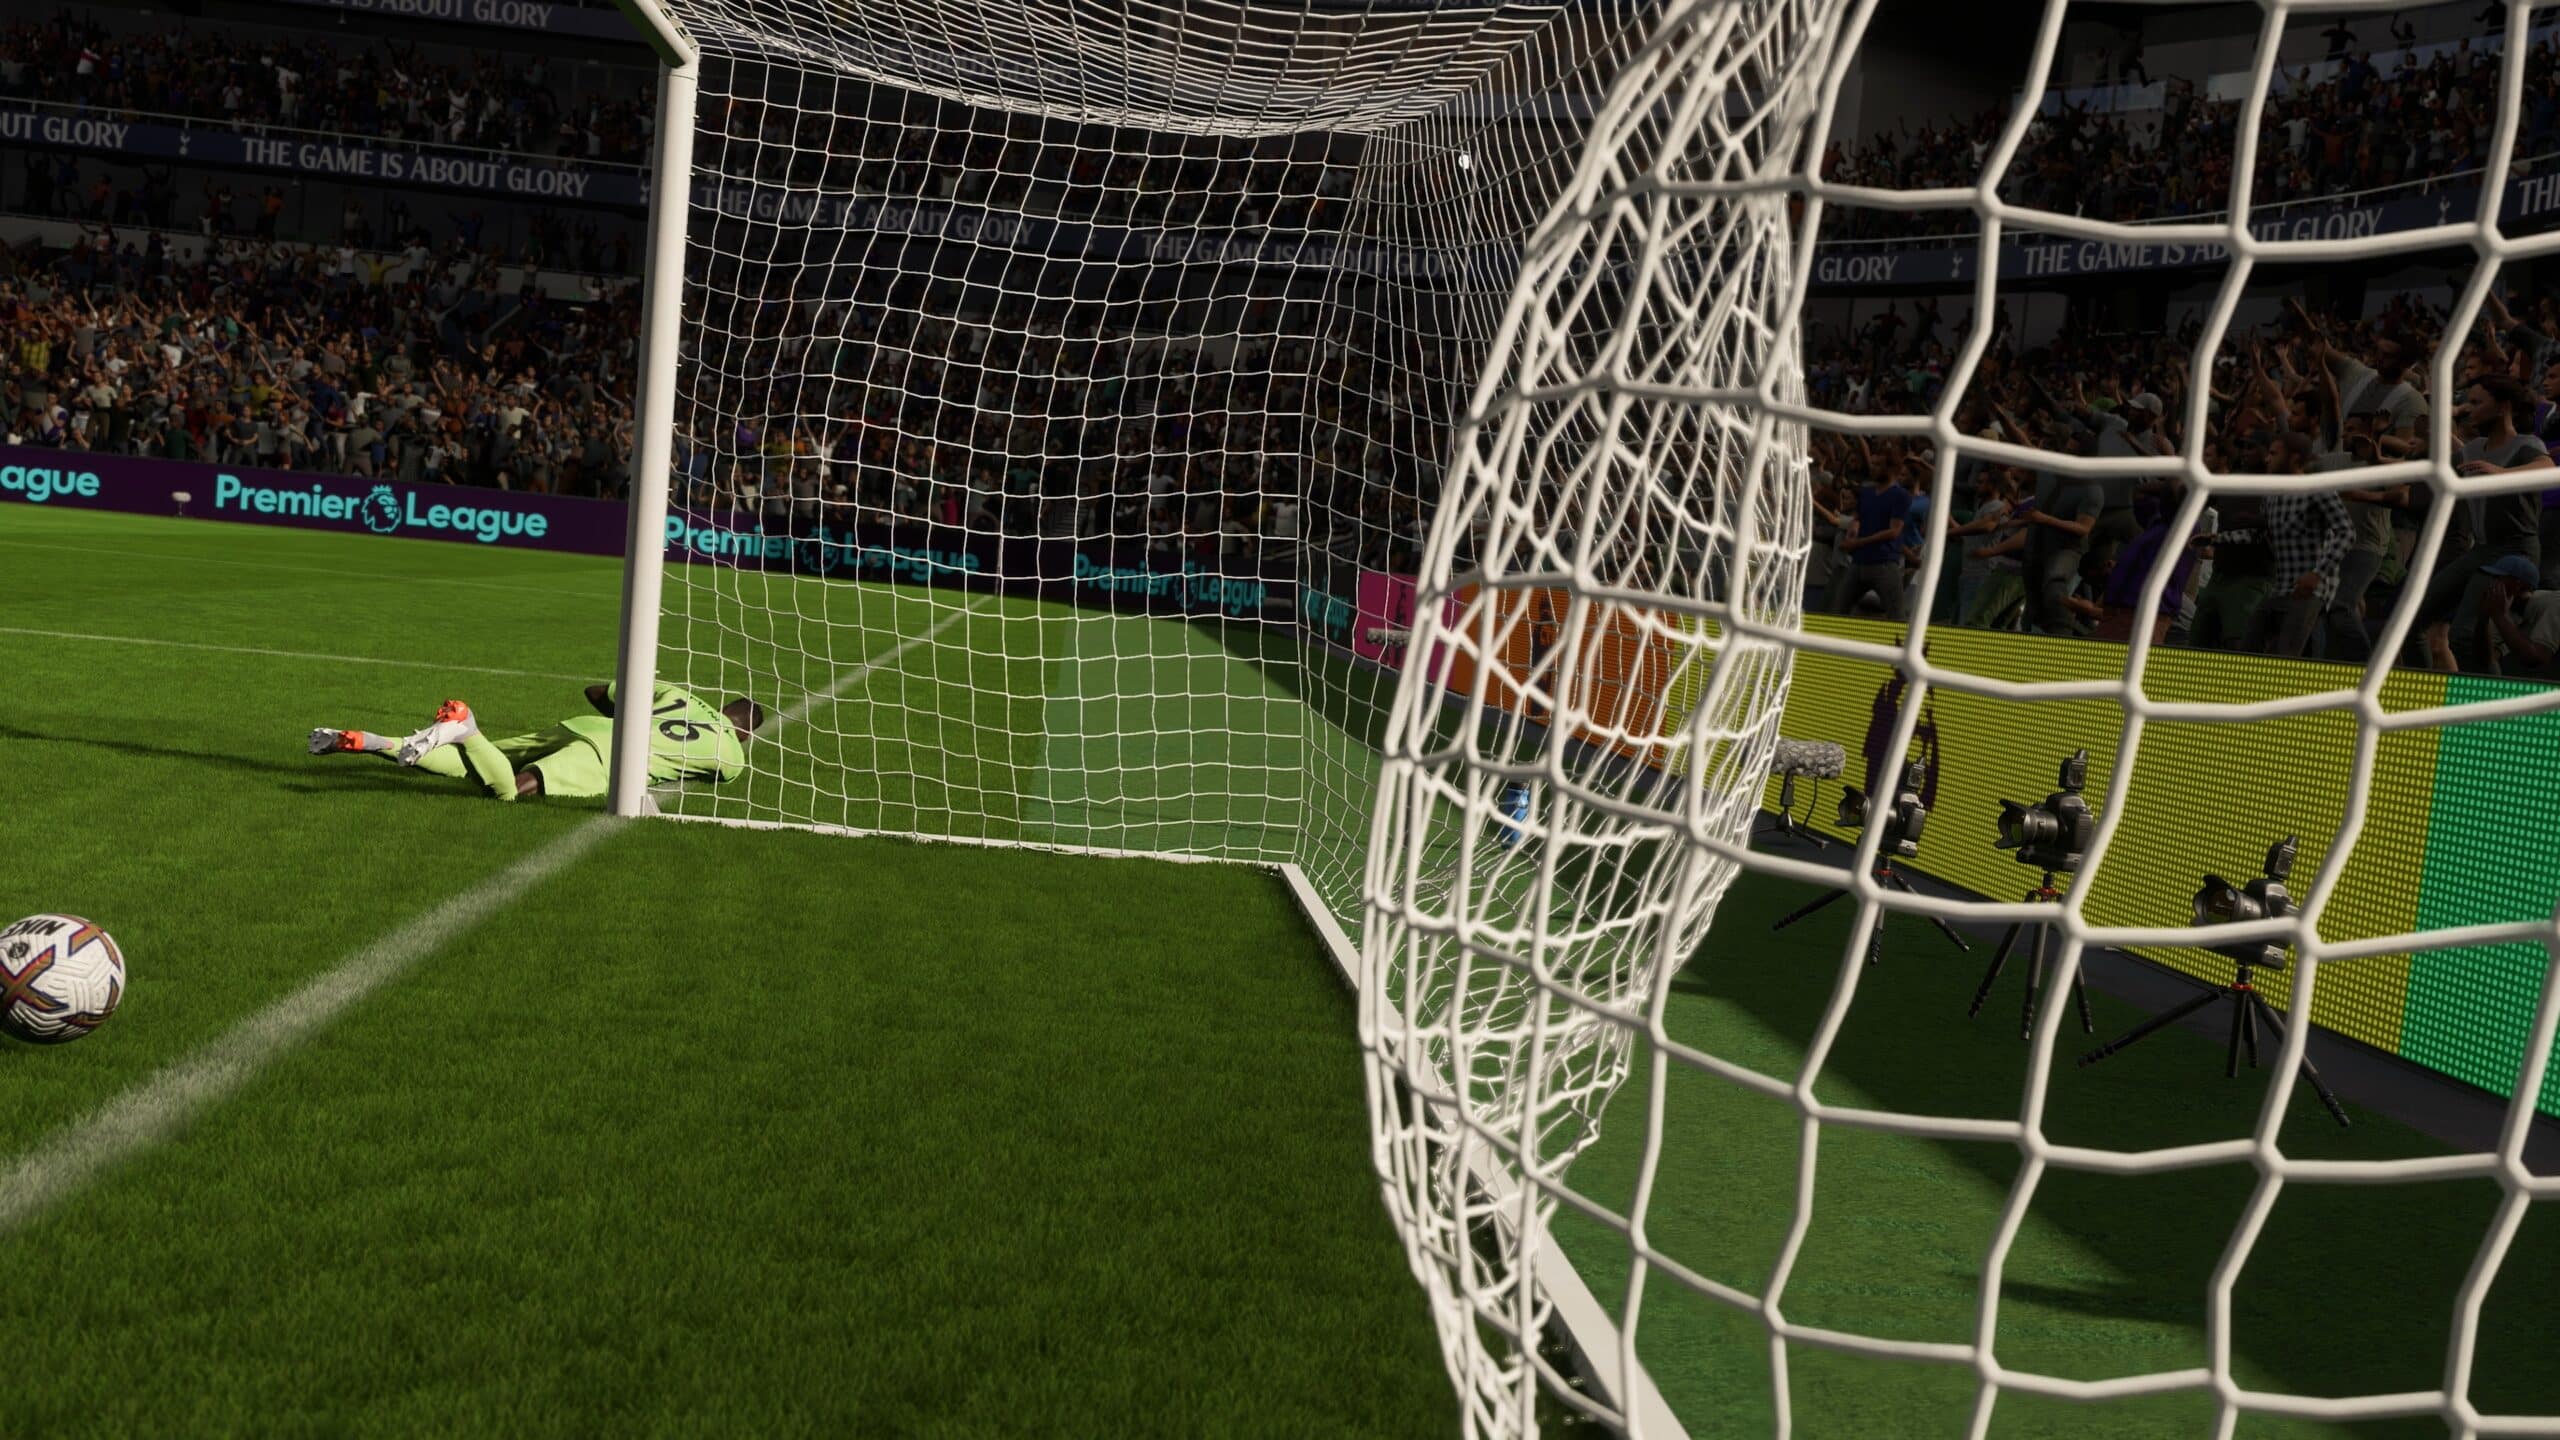 FIFA 23: New trailer with insights into the matchday experience